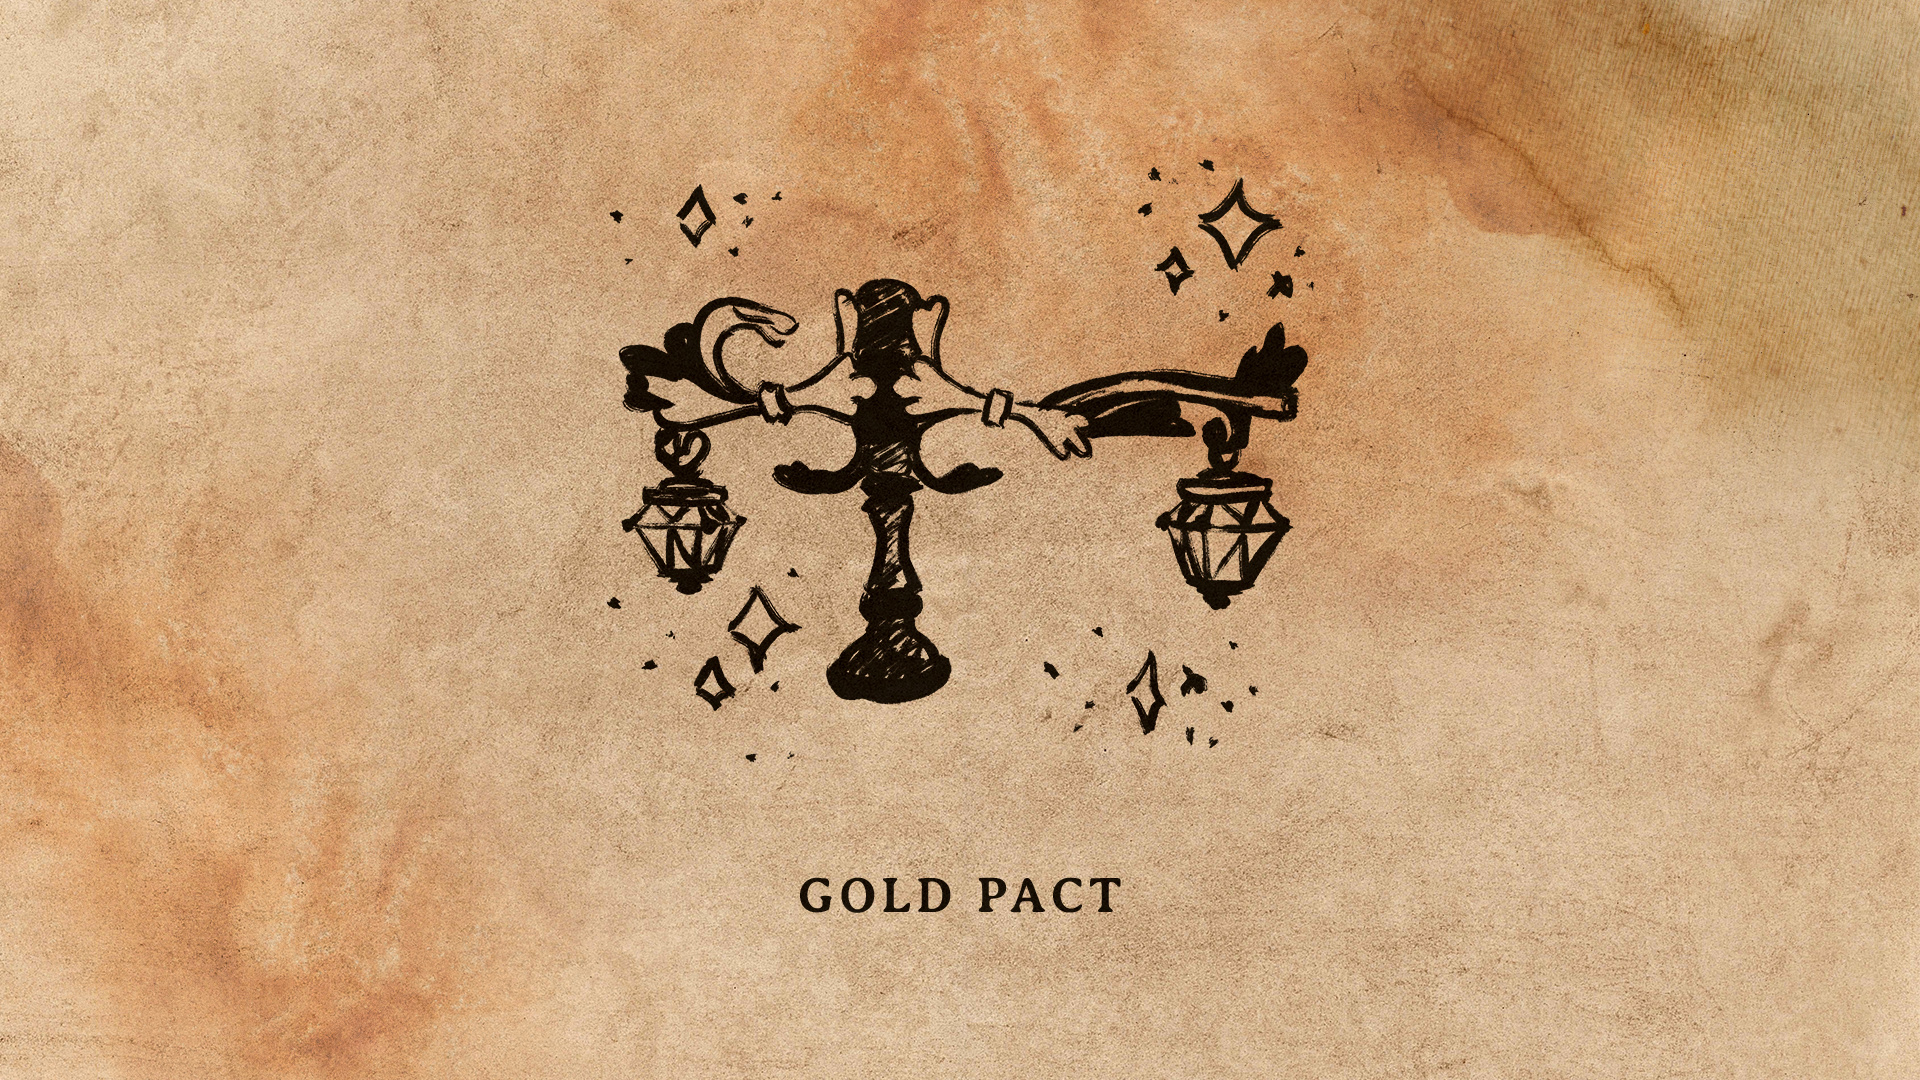 Gold Pact